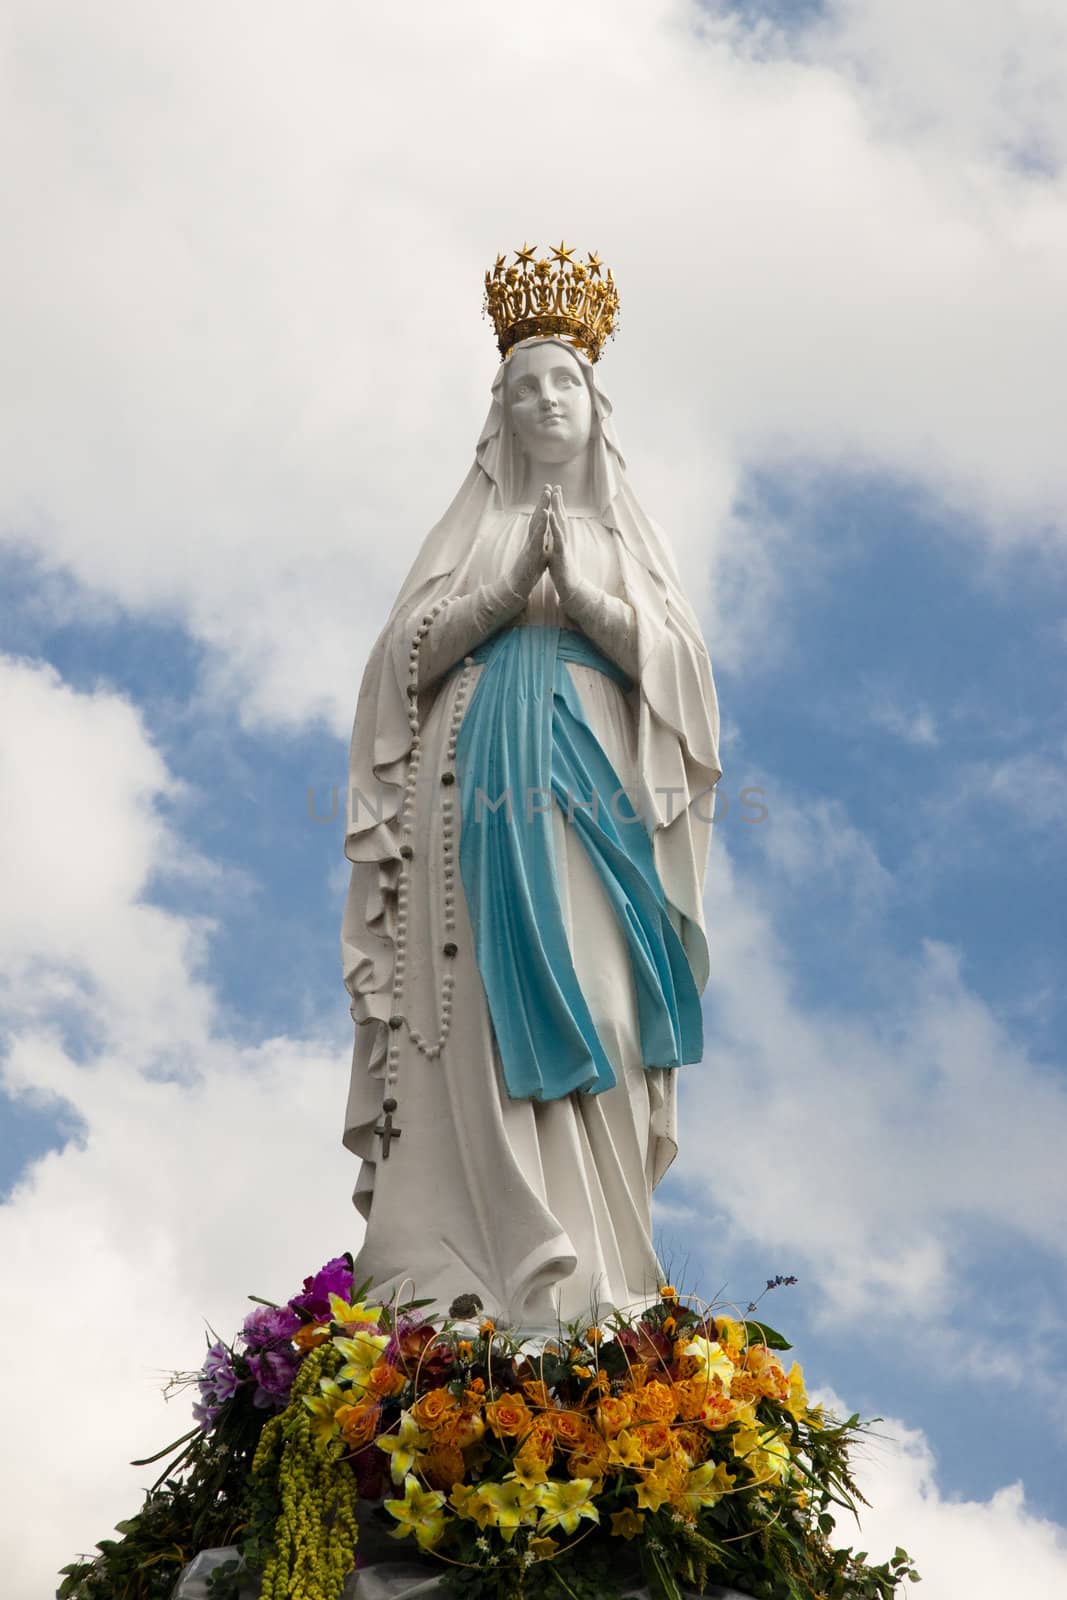 Big figure of the Madonna in Lourdes - France. Cloudy day